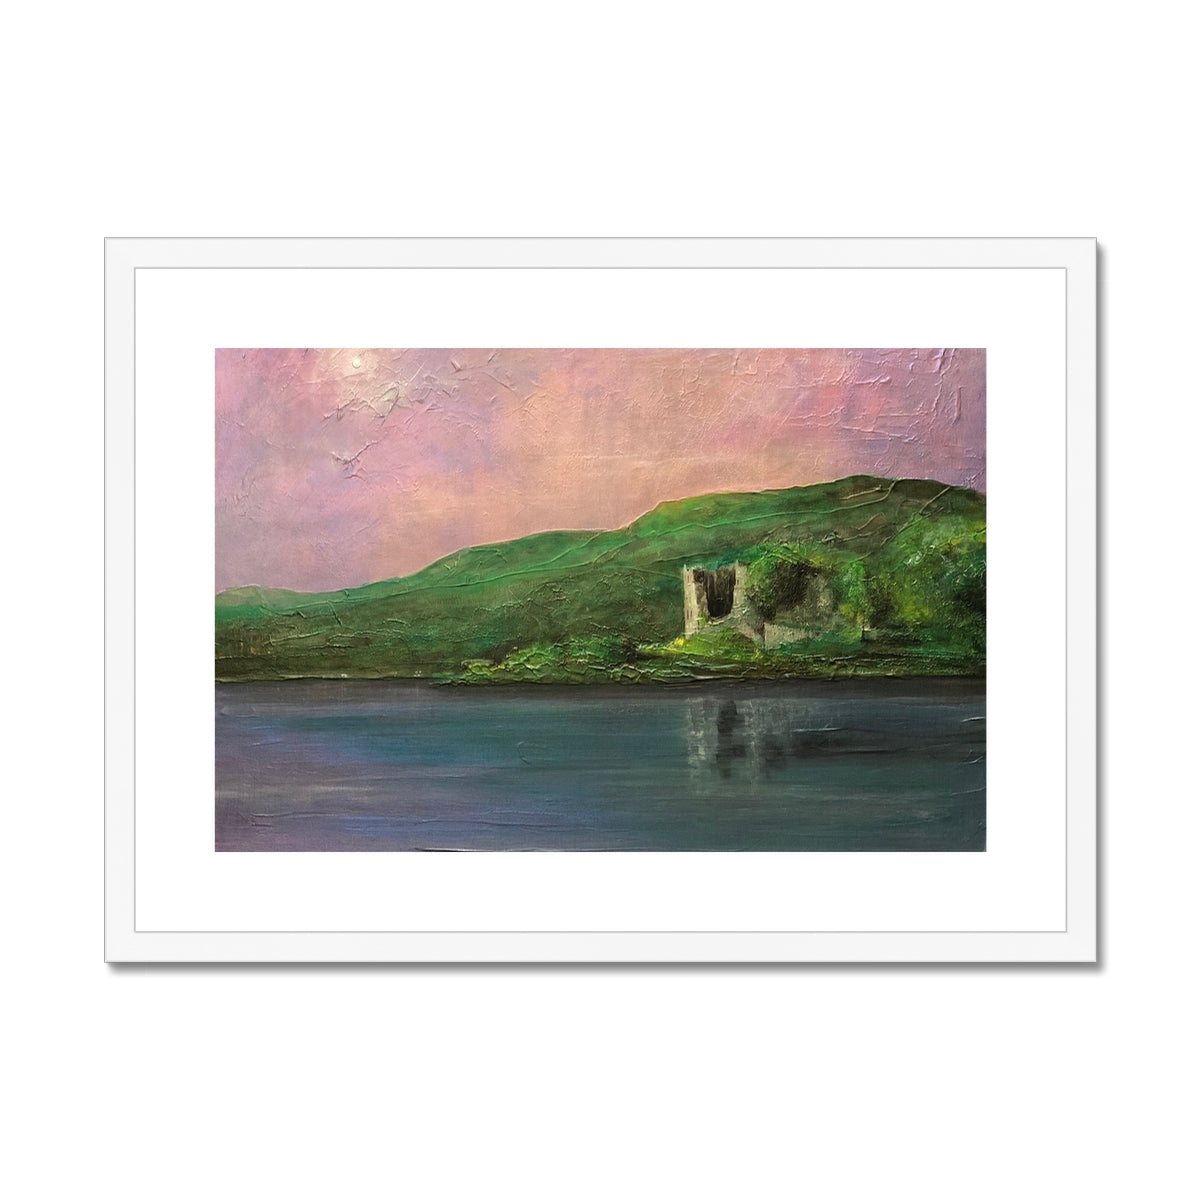 Old Castle Lachlan Painting | Framed & Mounted Prints From Scotland-Framed & Mounted Prints-Historic & Iconic Scotland Art Gallery-A2 Landscape-White Frame-Paintings, Prints, Homeware, Art Gifts From Scotland By Scottish Artist Kevin Hunter